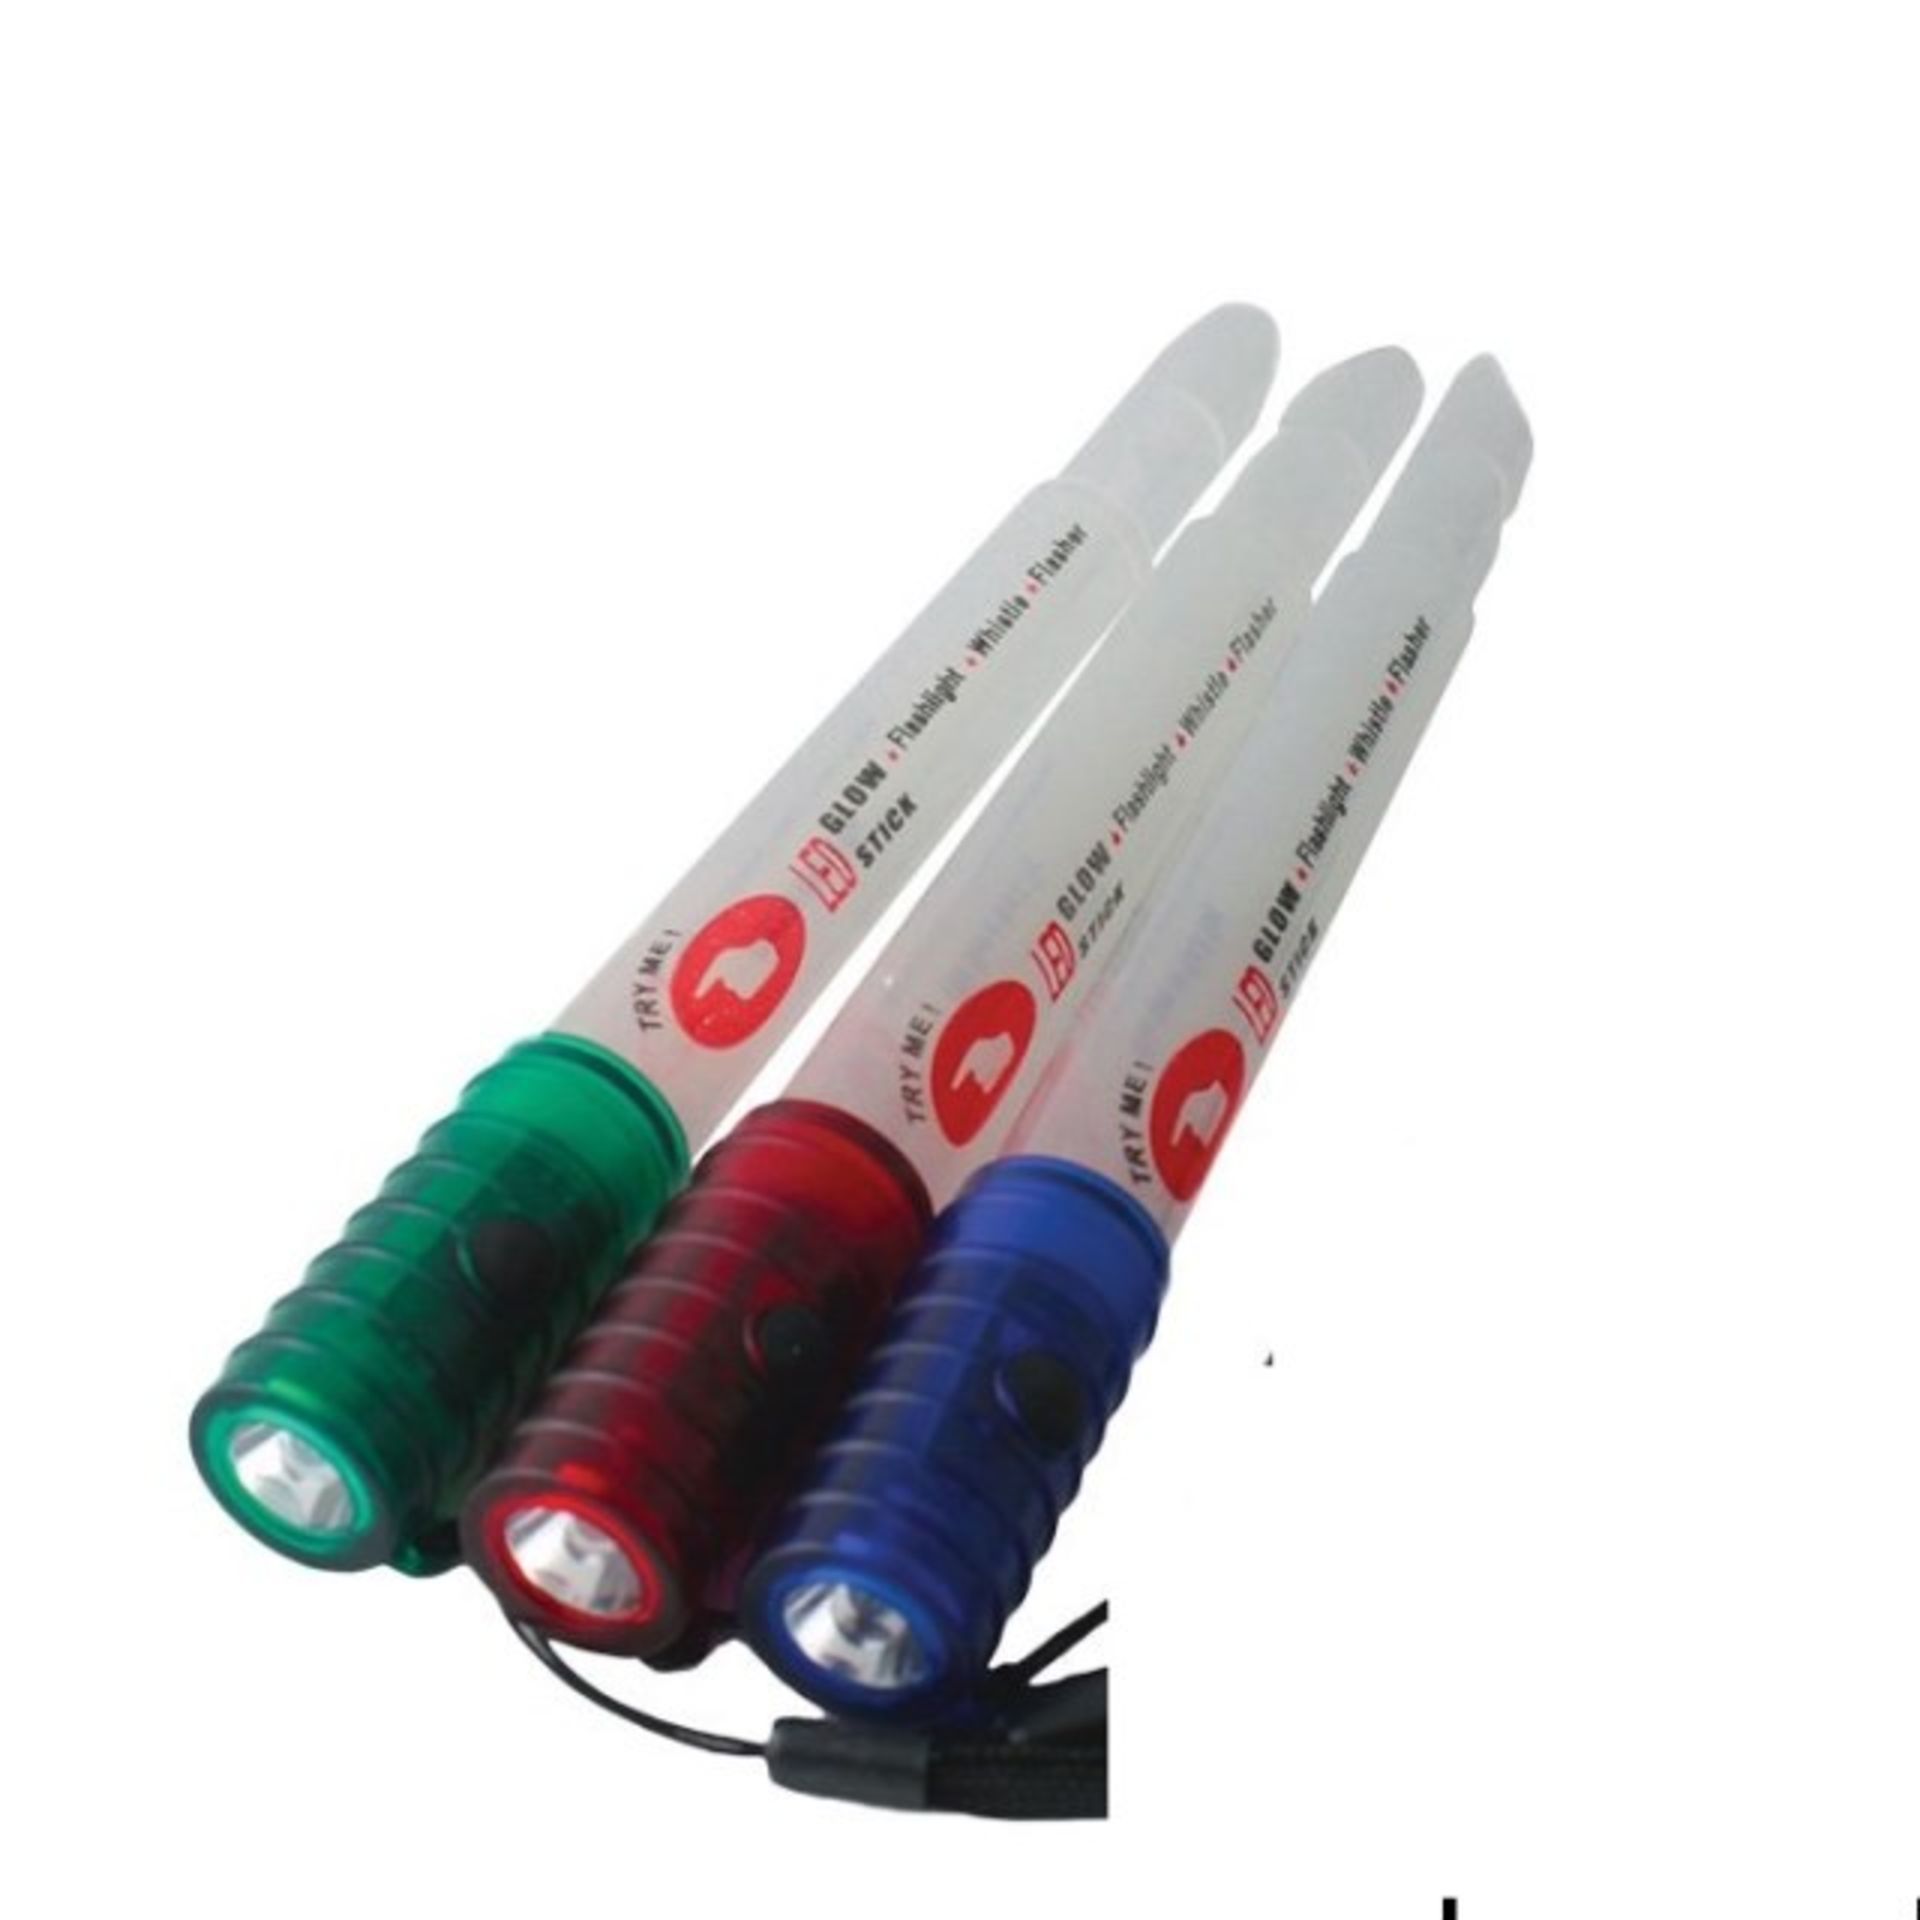 V Brand New Three LED Glowstick Torches With Emergency Whistle and 3 Light Settings Includes - Image 2 of 4